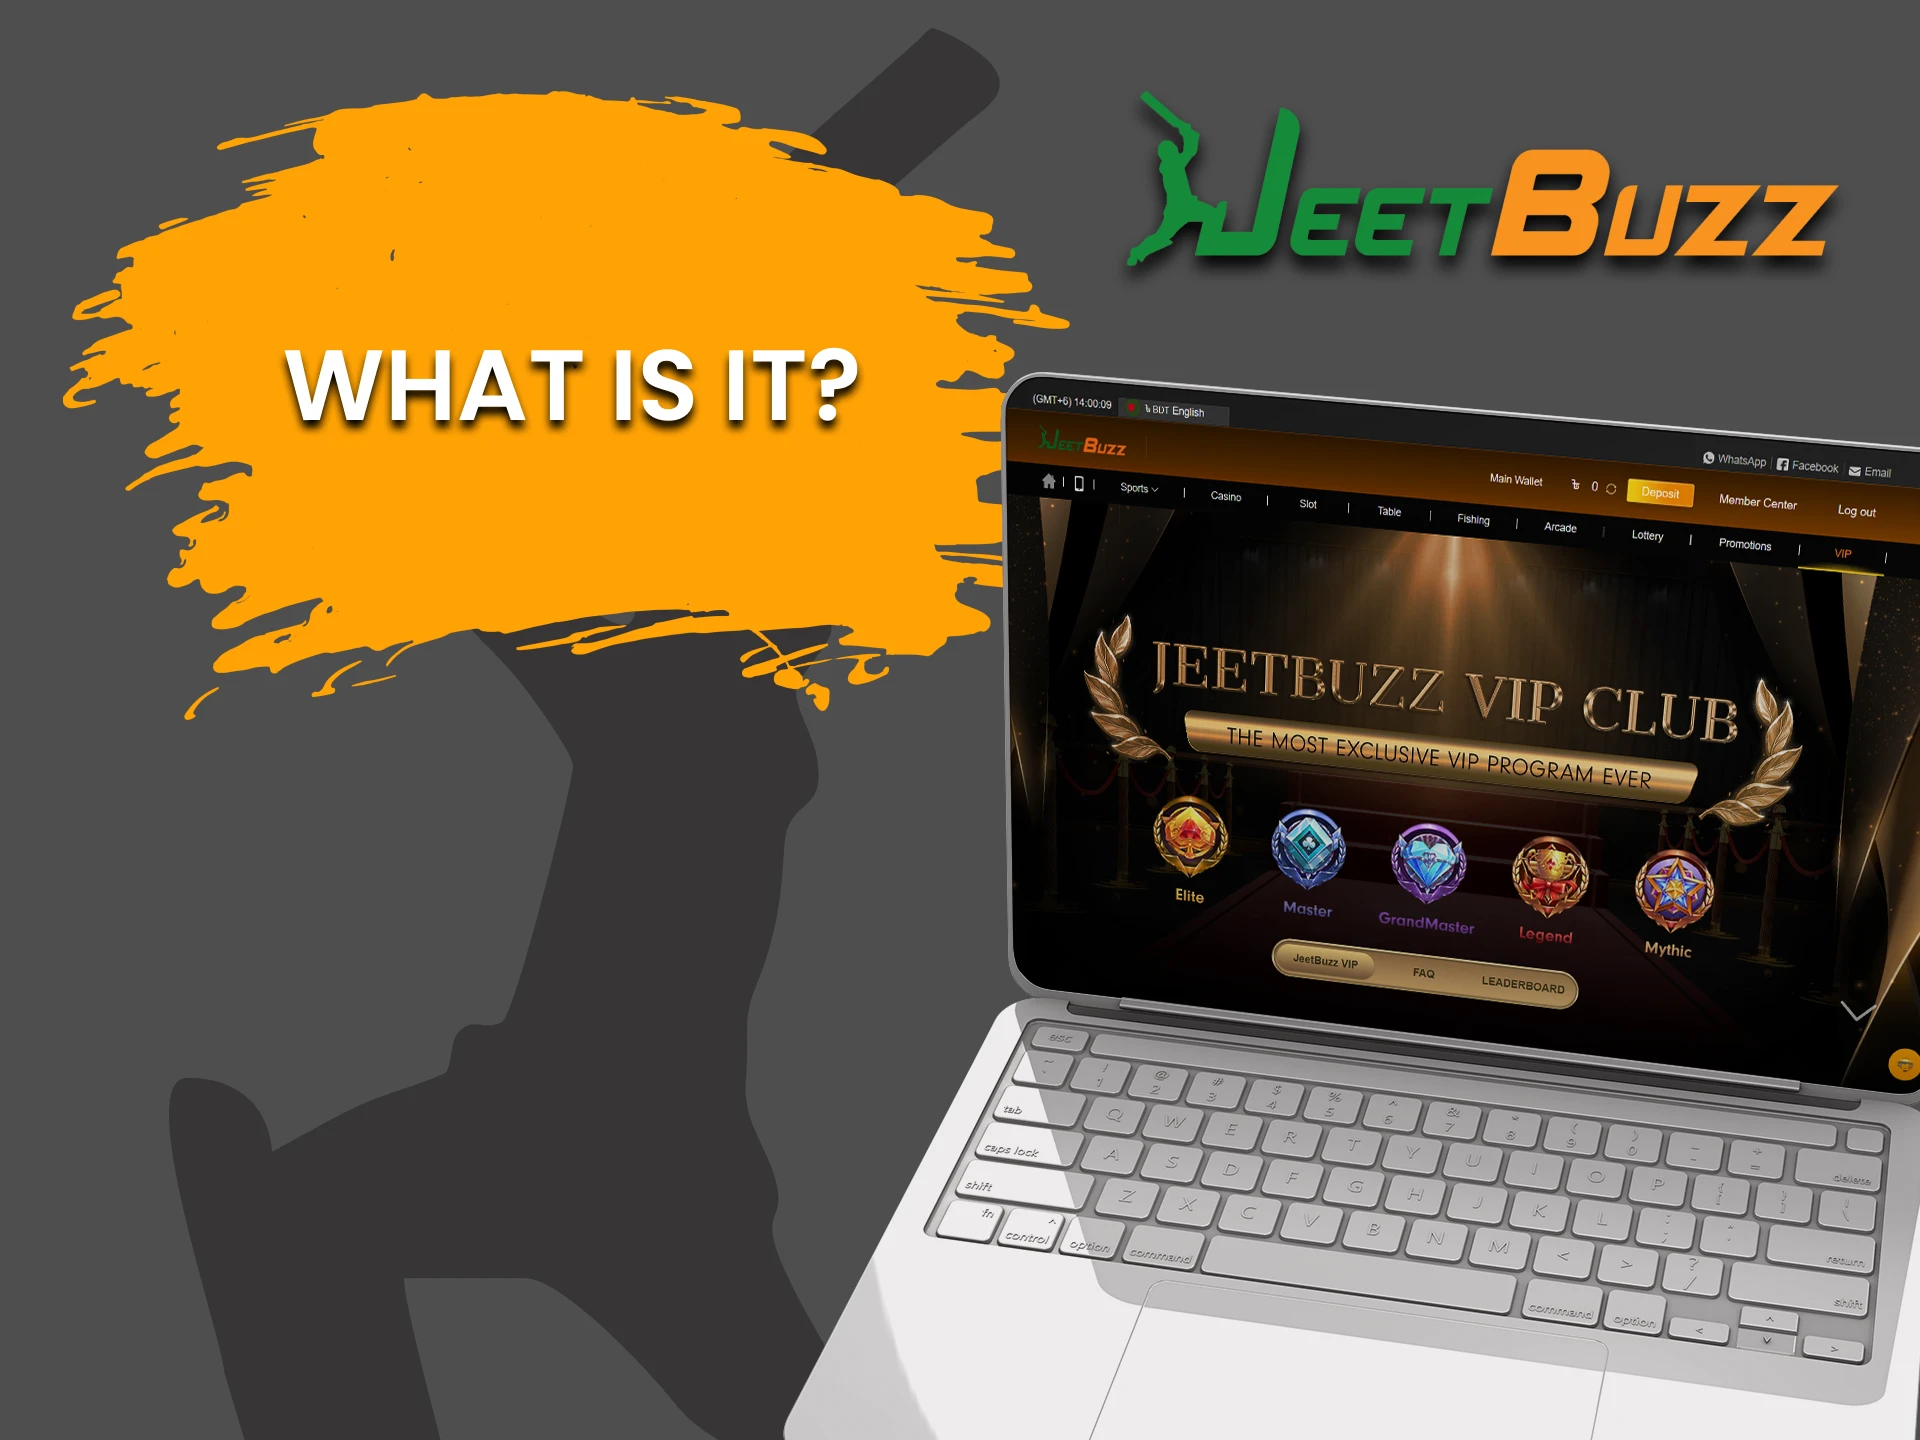 We will talk about the VIP club on the JeetBuzz website.